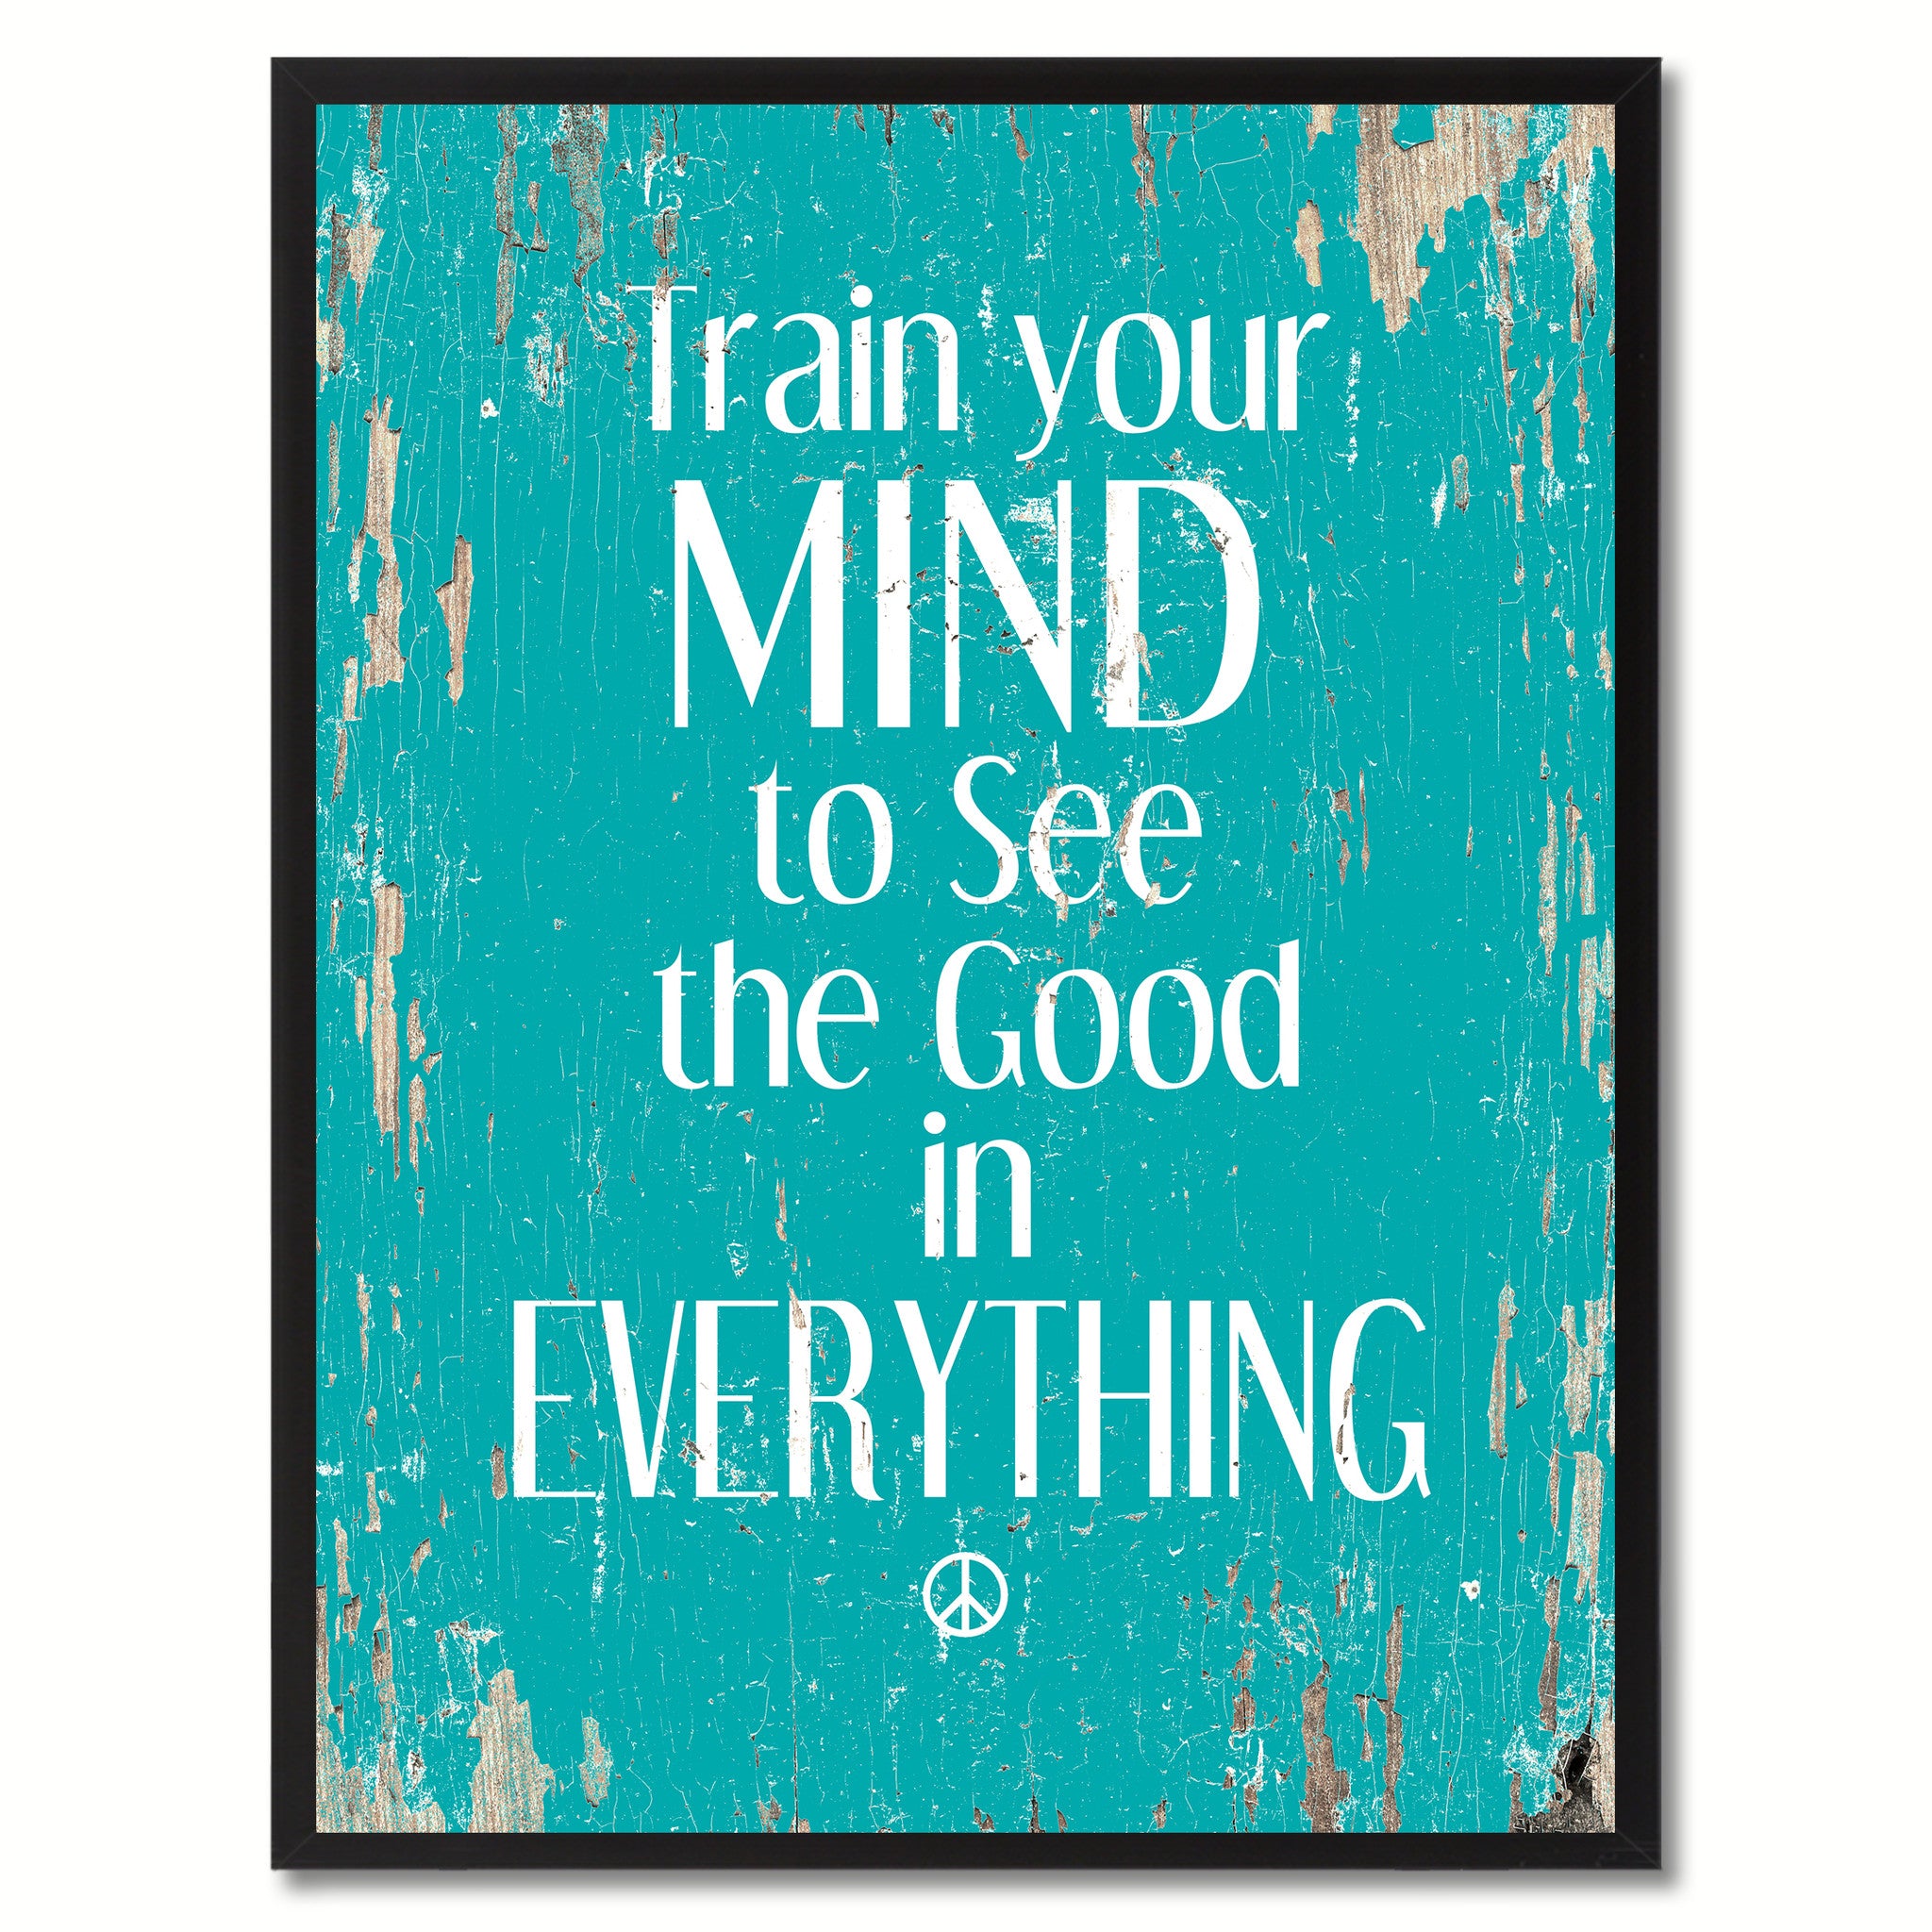 Train your mind to see the good in everything Motivational Quote Saying Canvas Print with Picture Frame Home Decor Wall Art, Aqua